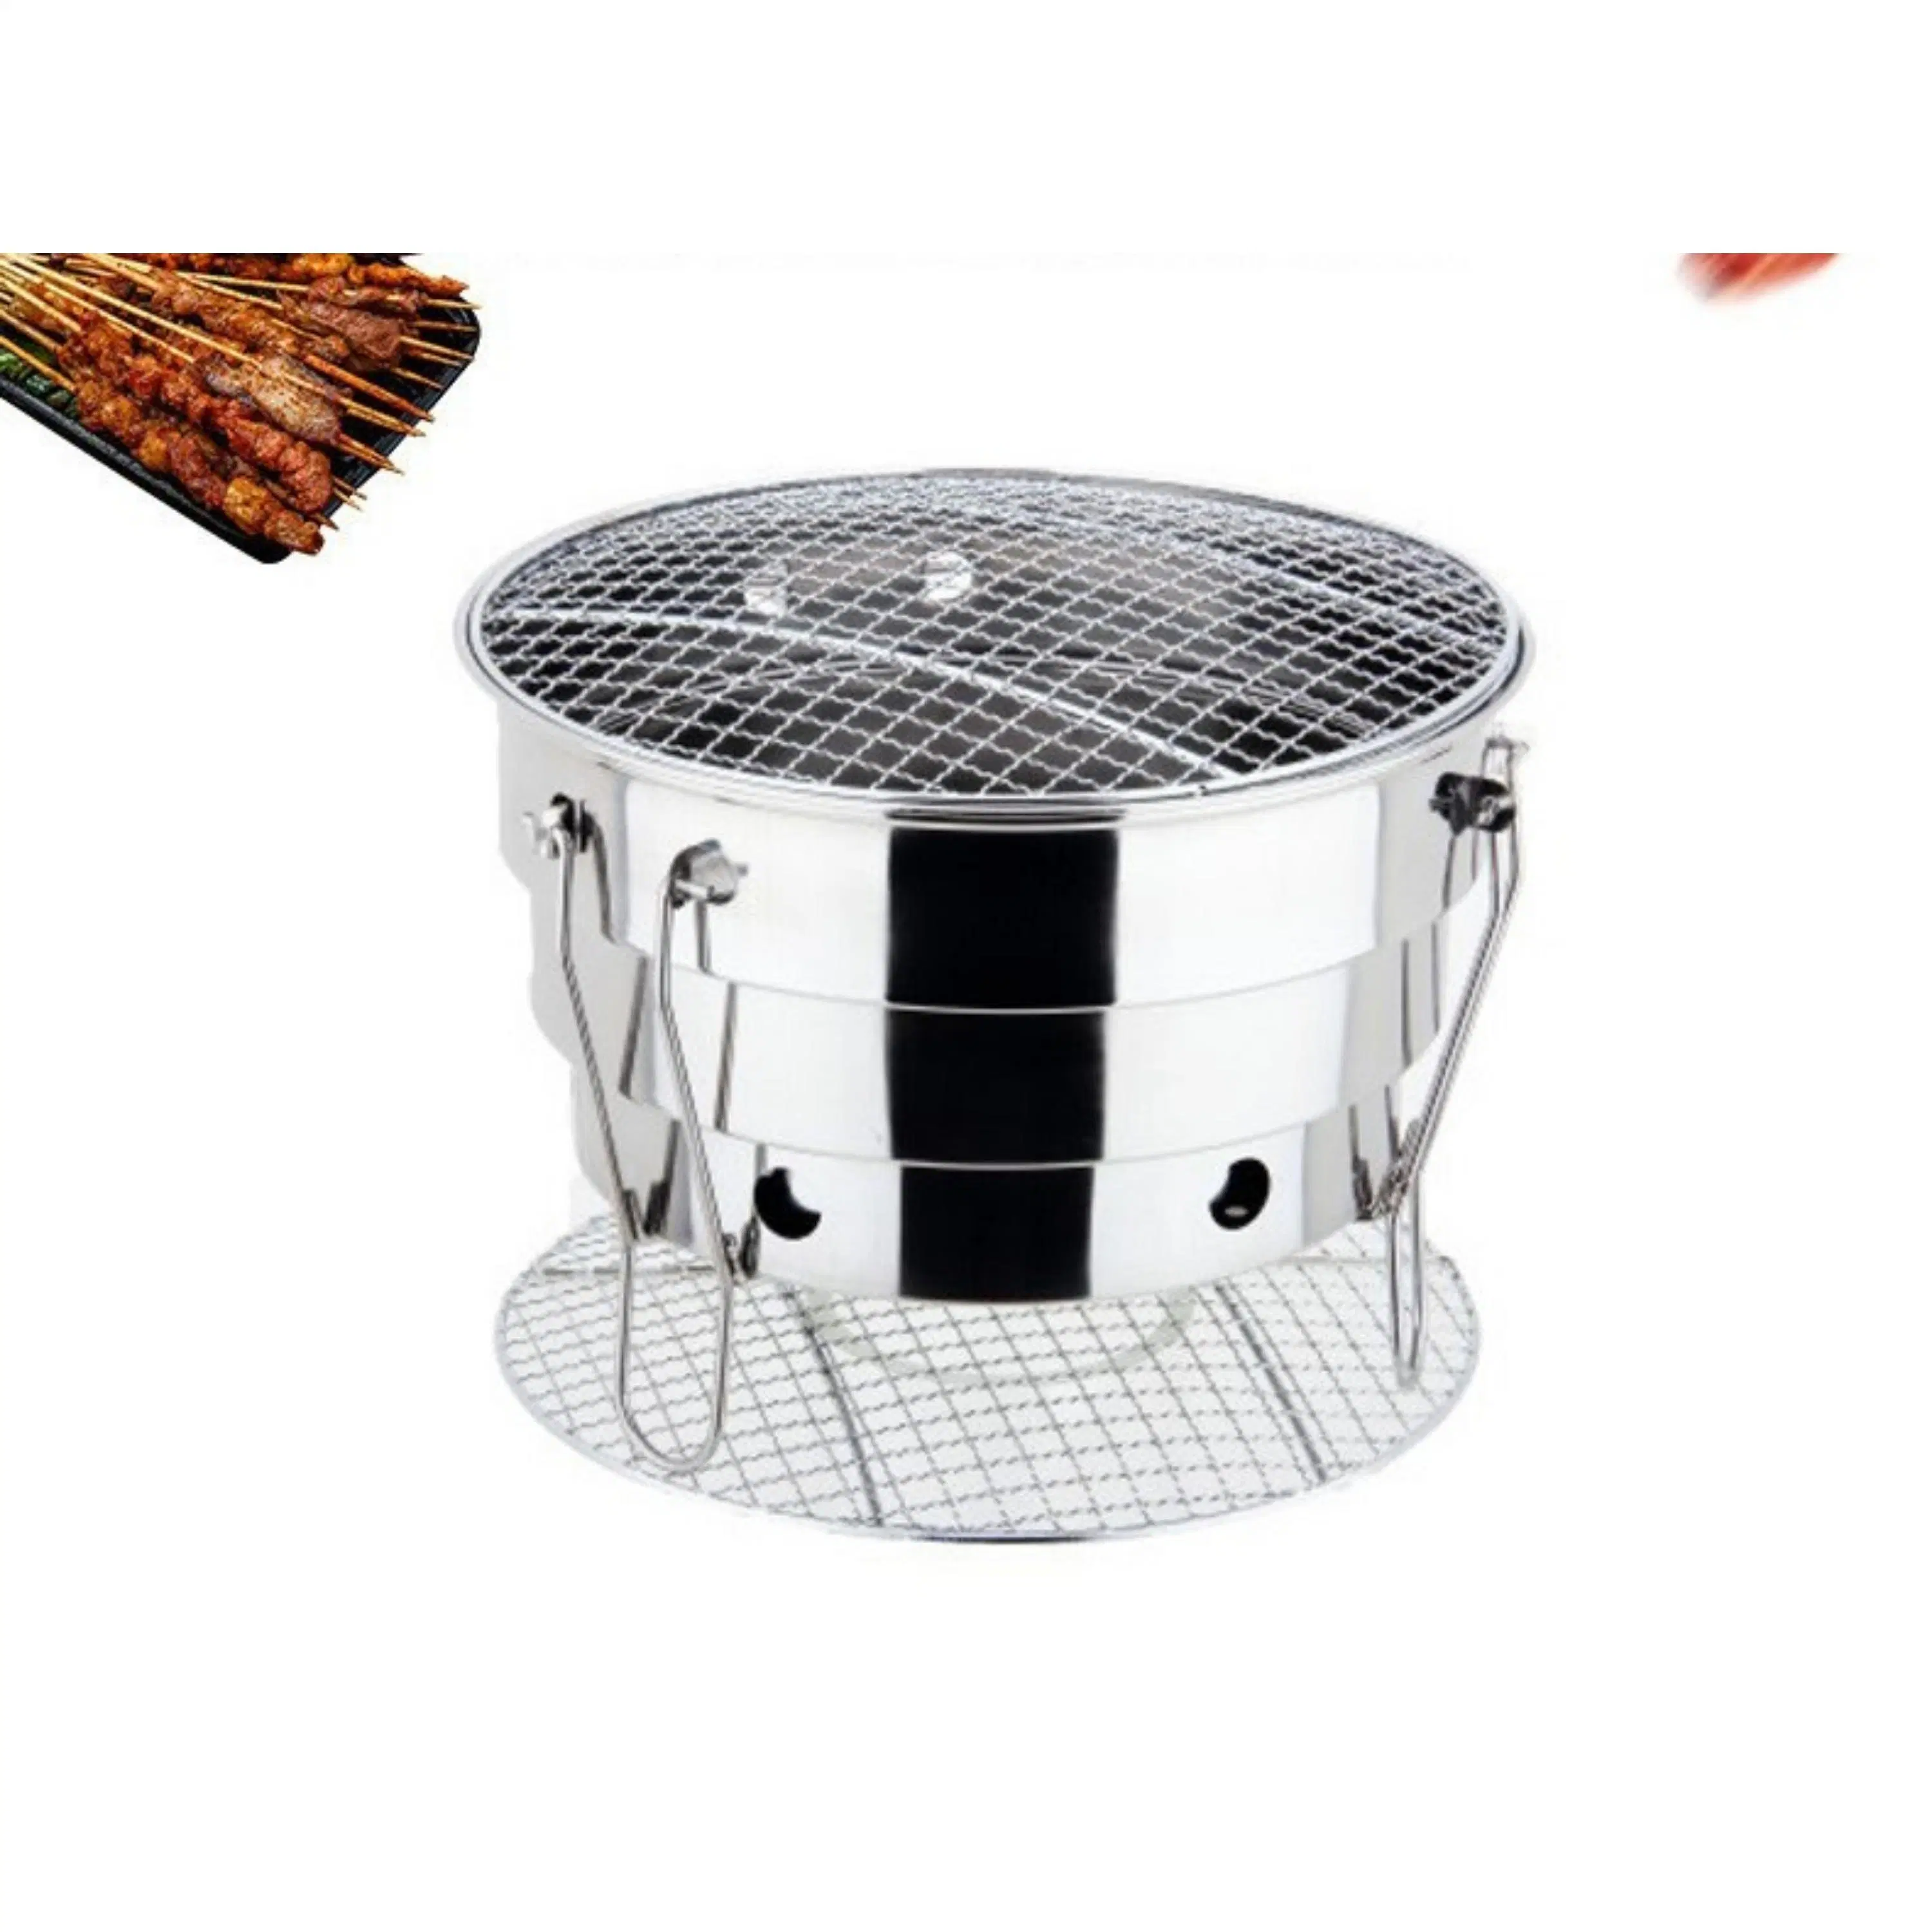 Stainless Steel Portable Charcoal Grill, Korean BBQ Grill, Desktop Grill